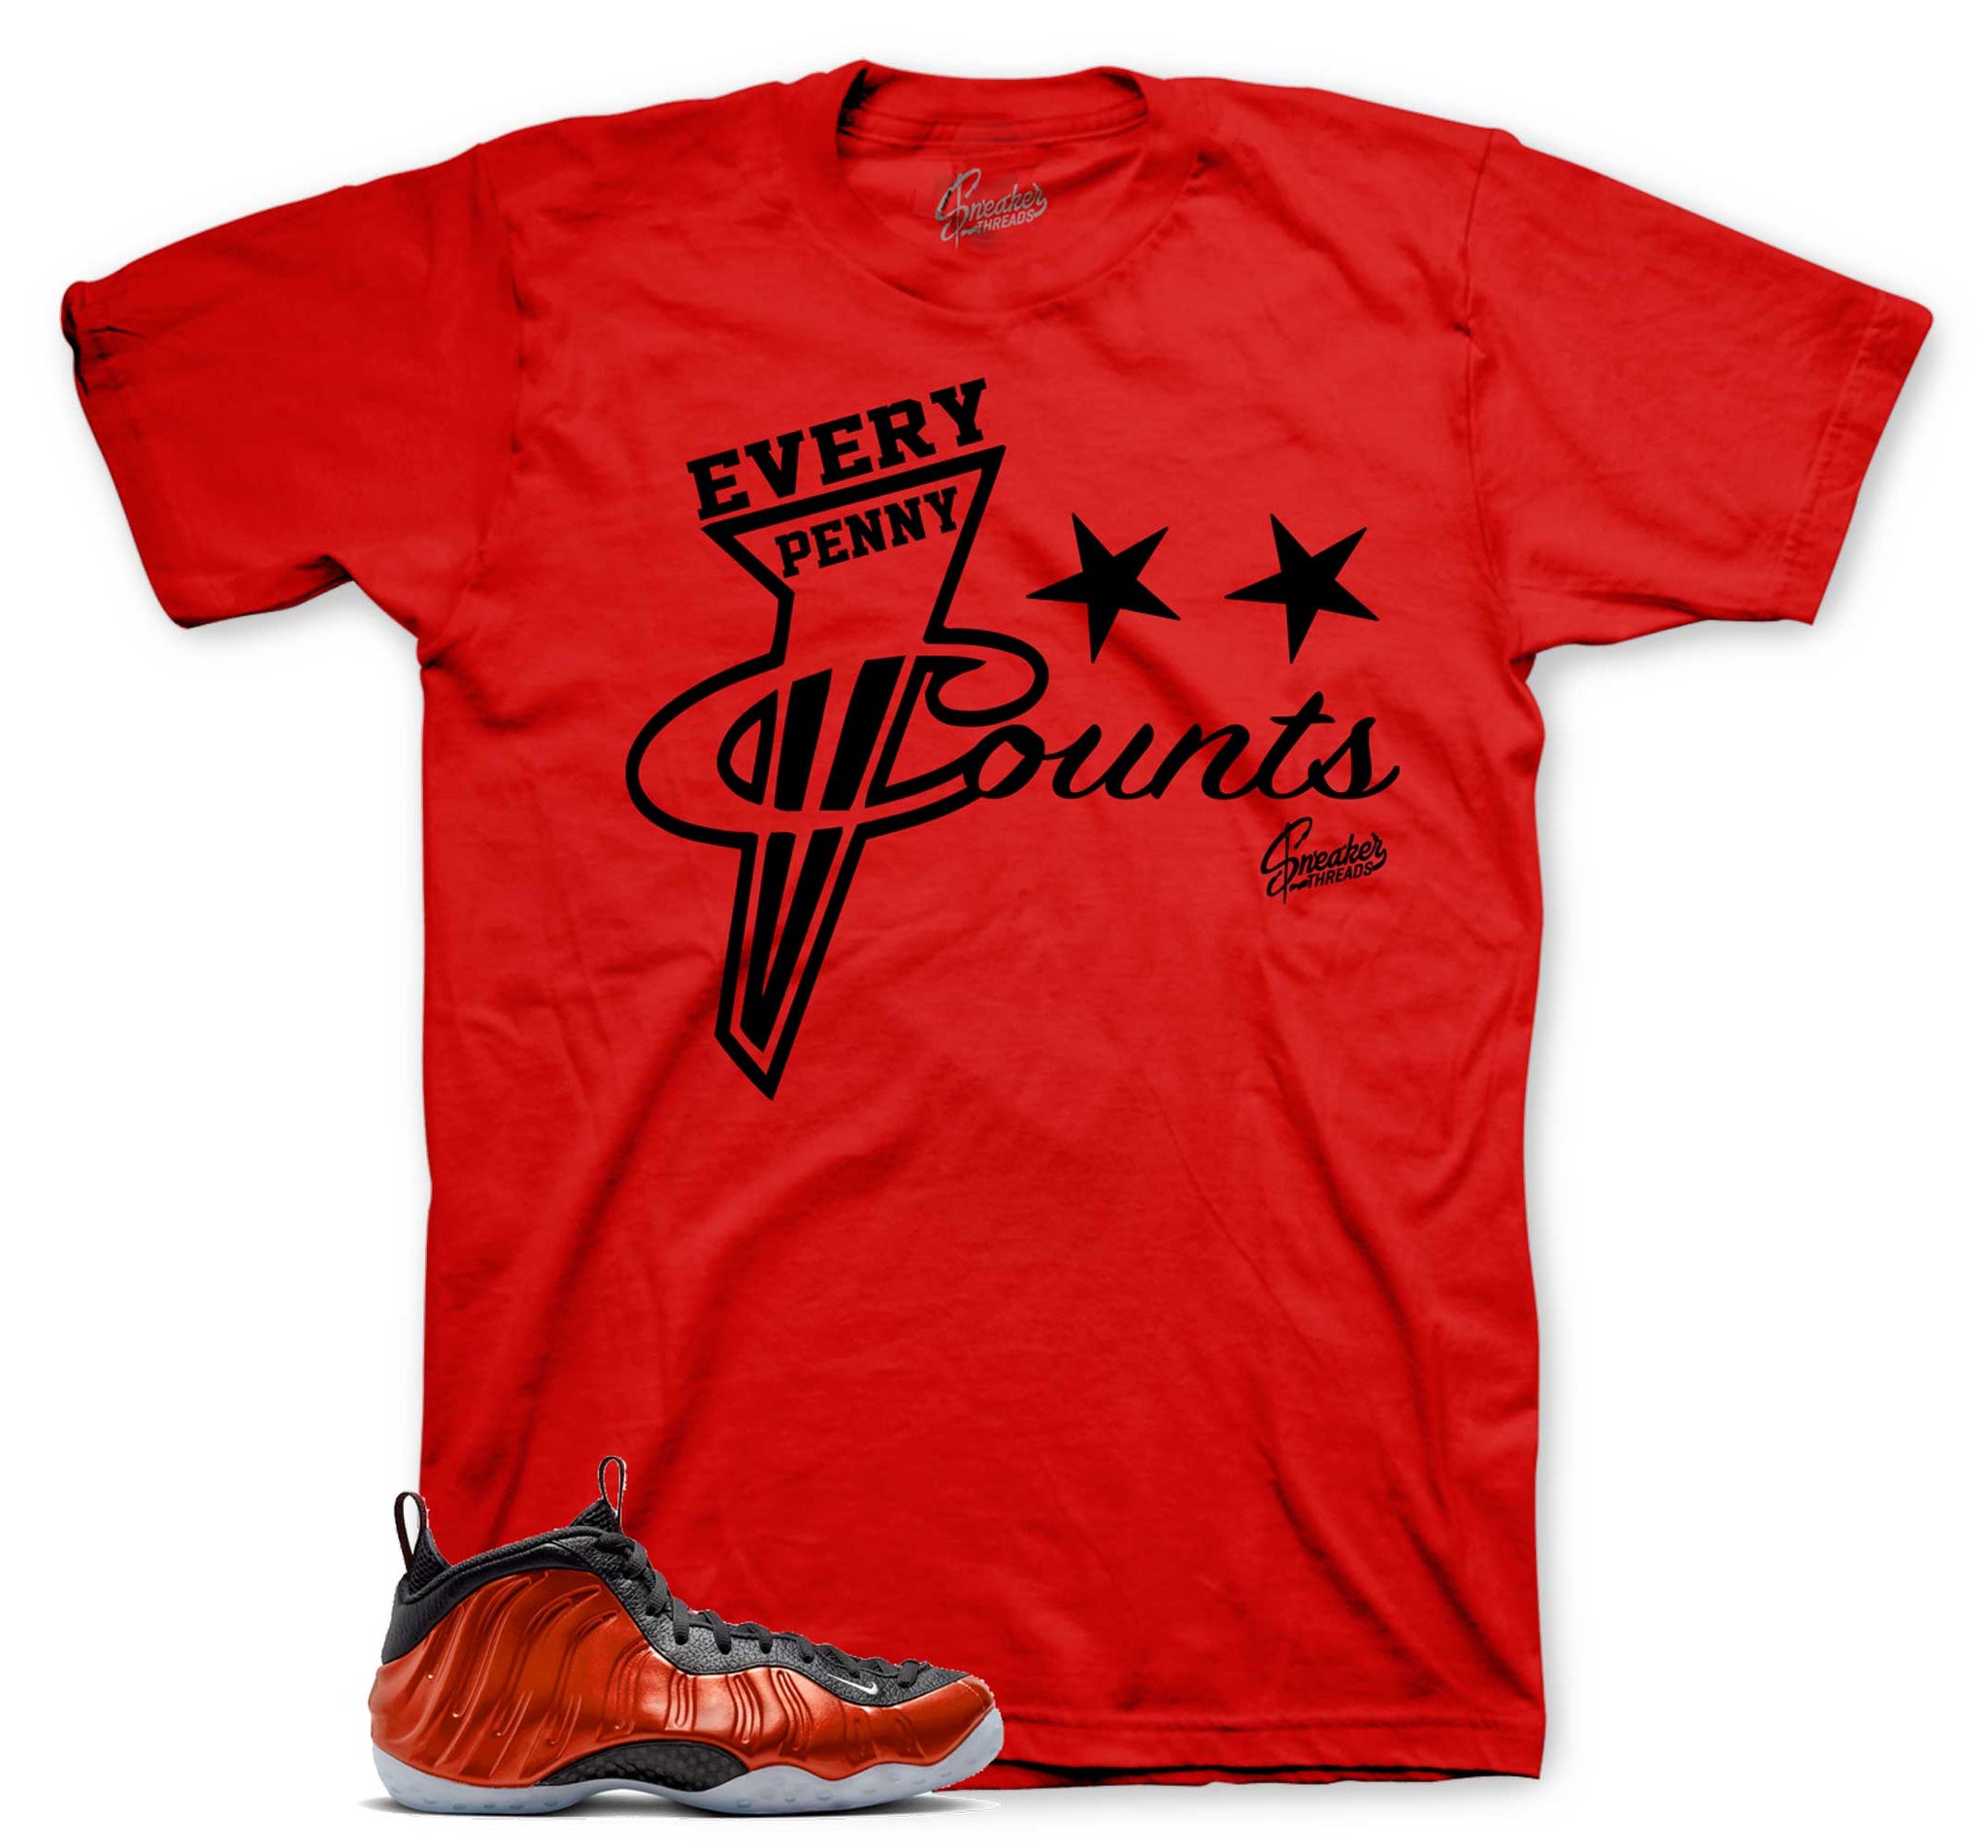 Foamposite Metallic Red Shirt - Every Penny - Red